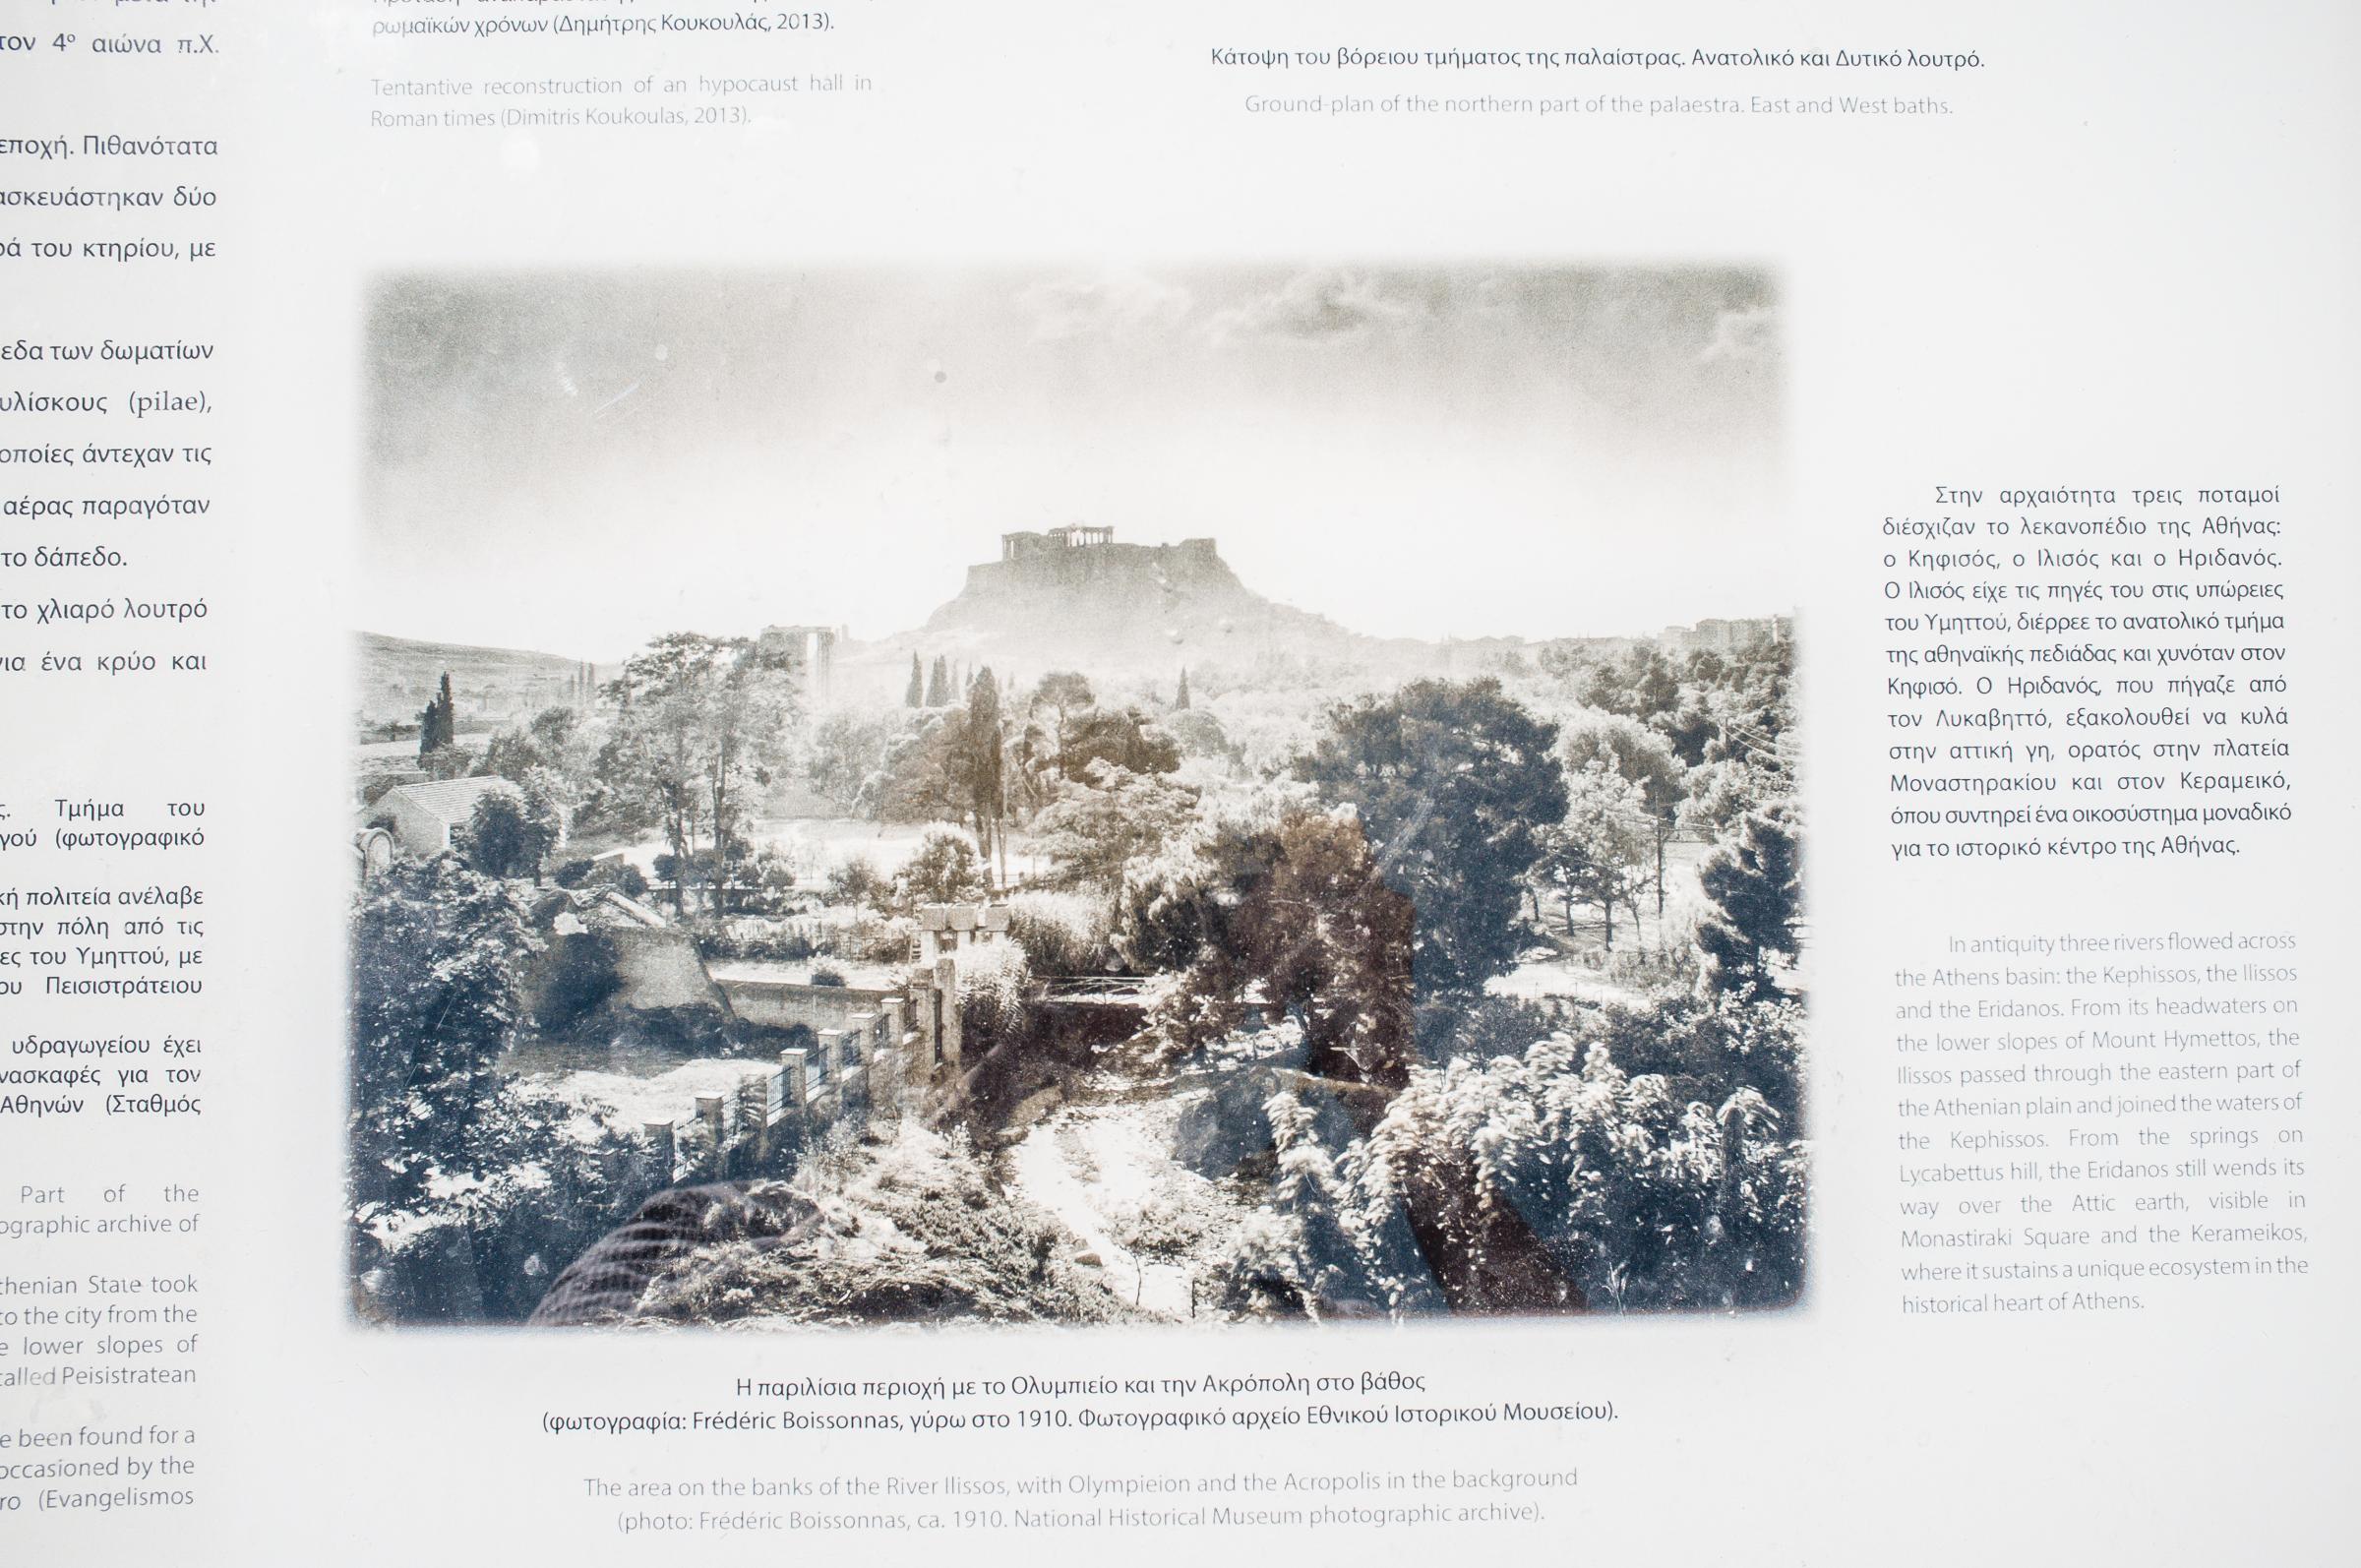 acropolis - Informational panel with a photo of the area on the banks...